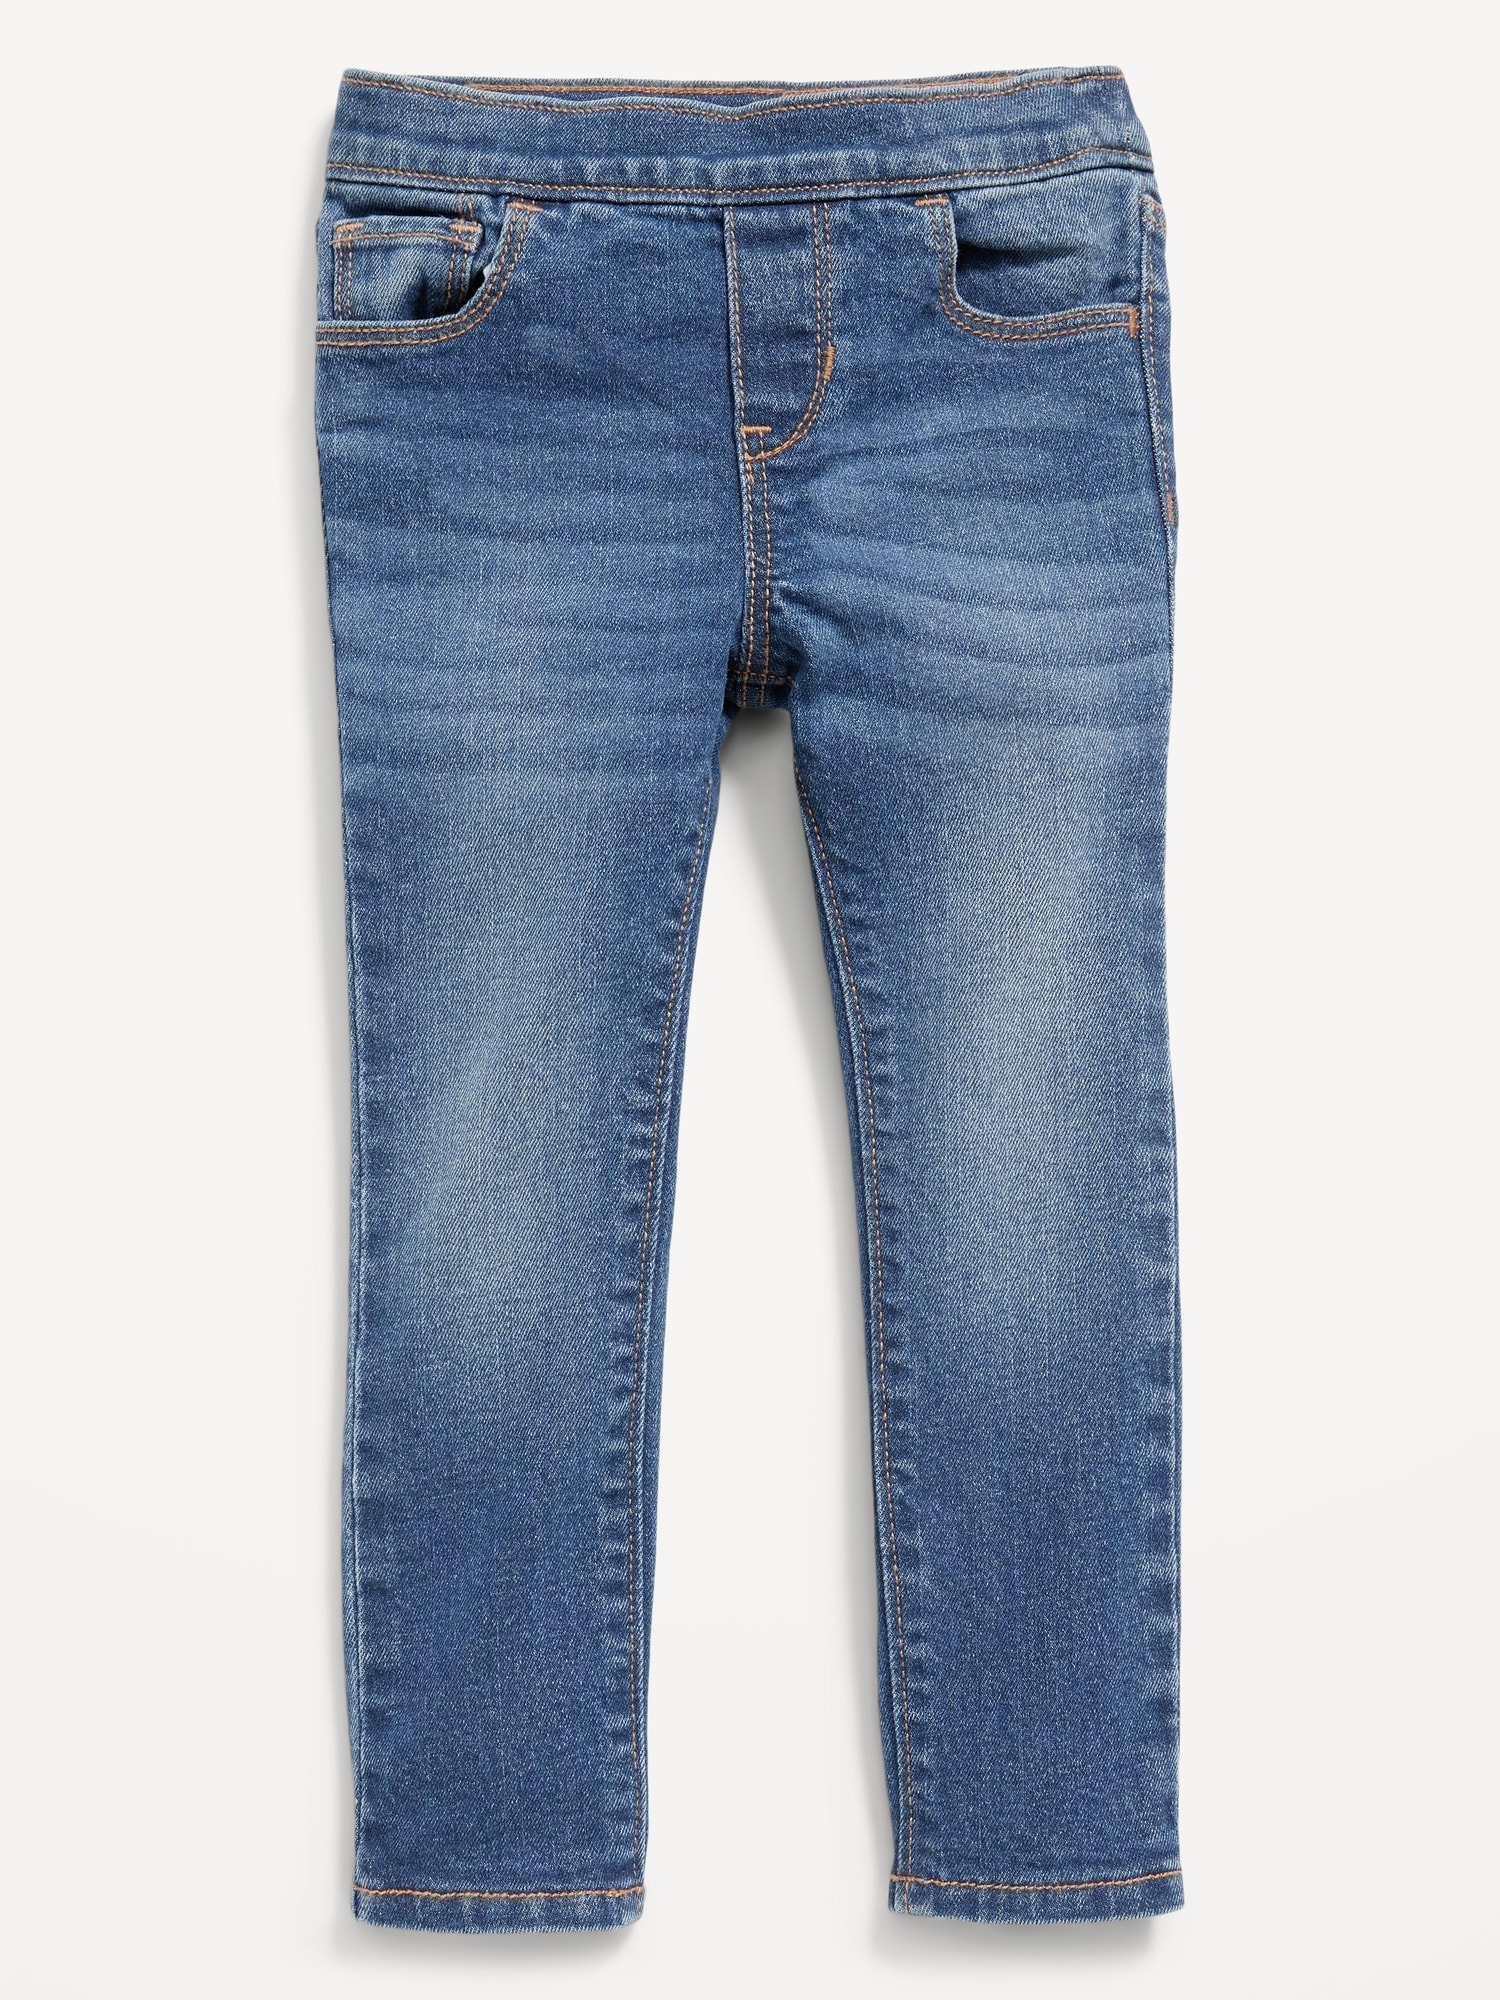 Wow Skinny Pull-On Jeans for Toddler Girls